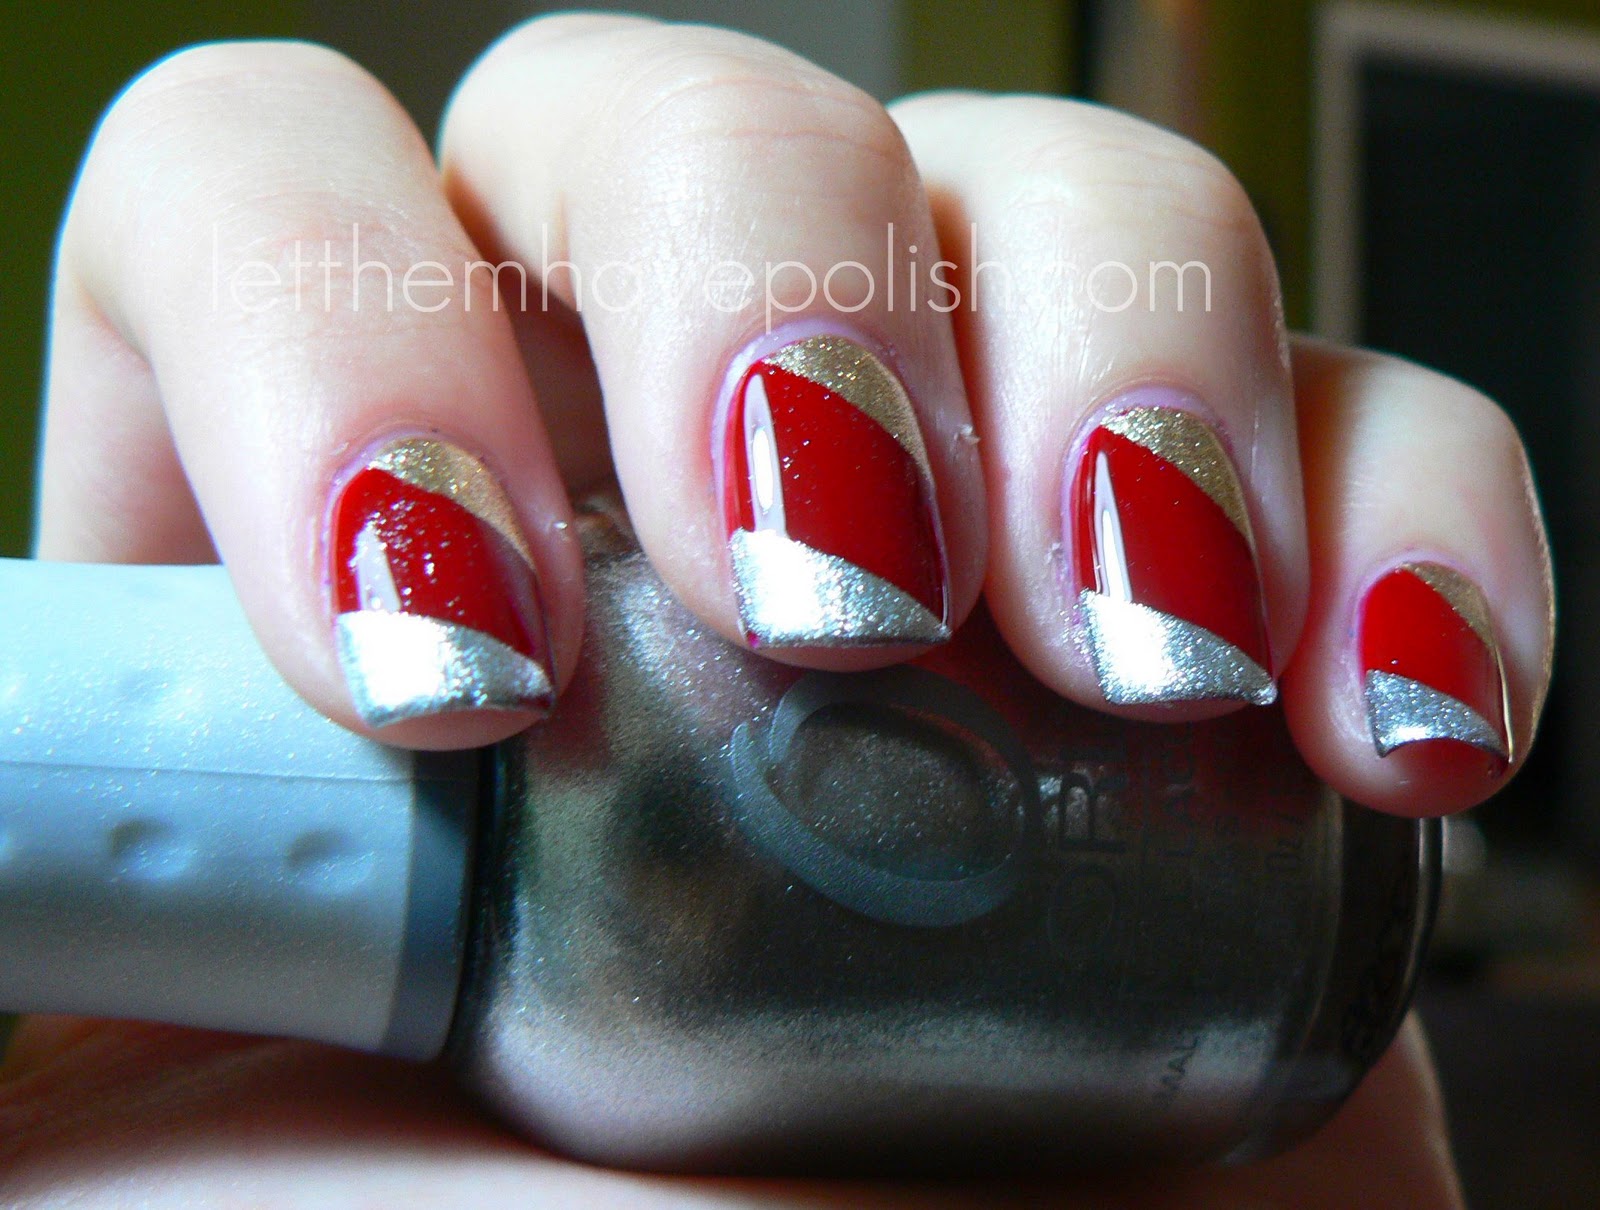 1. Yeal Christmas Nail Design Ideas - wide 7